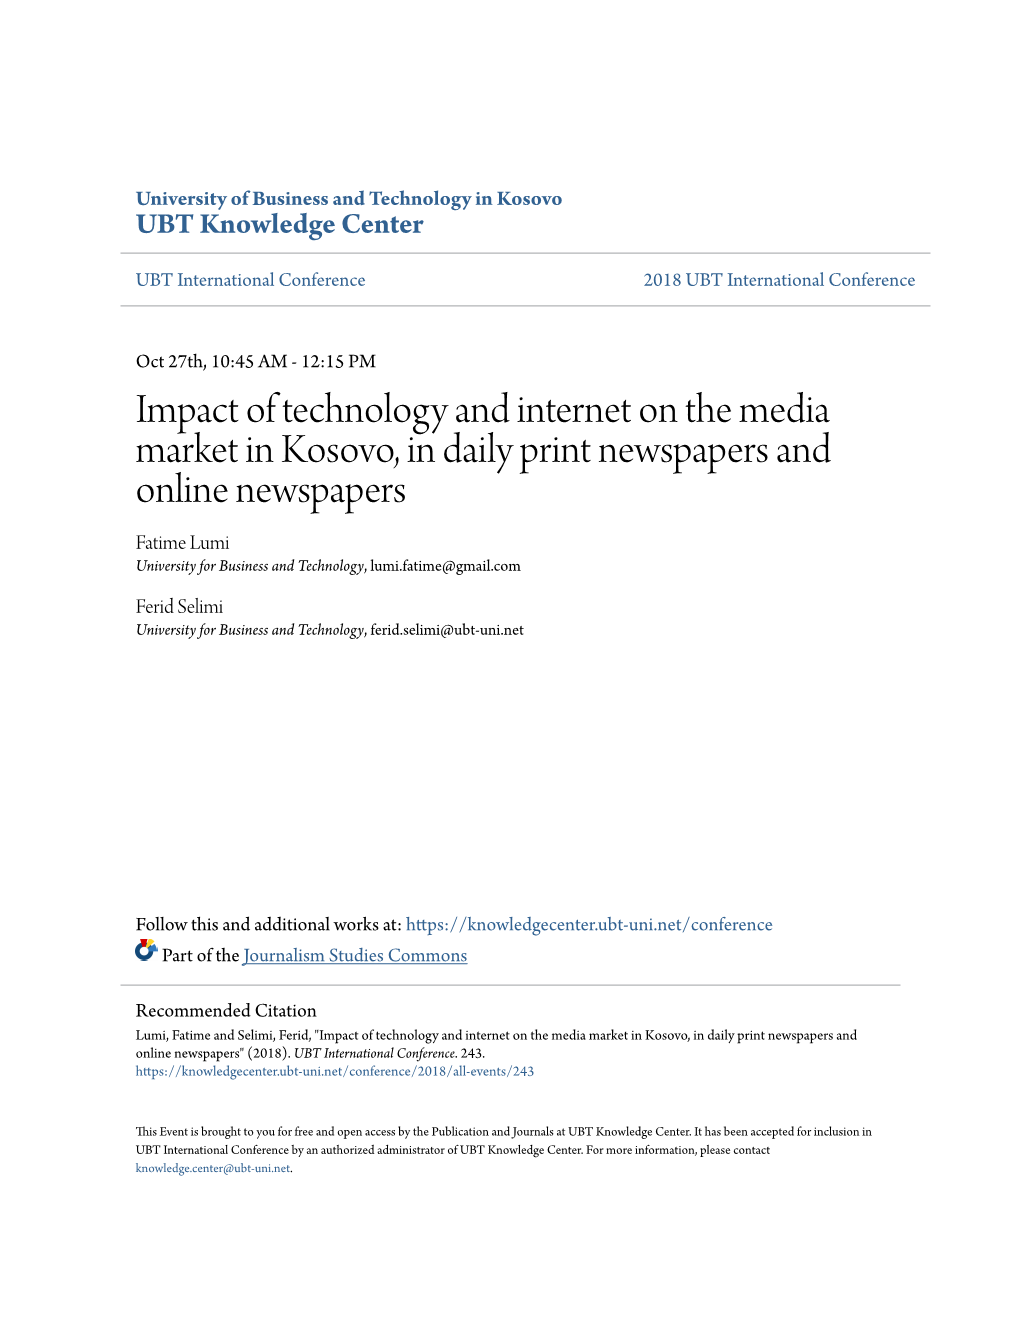 Impact of Technology and Internet on the Media Market in Kosovo, In